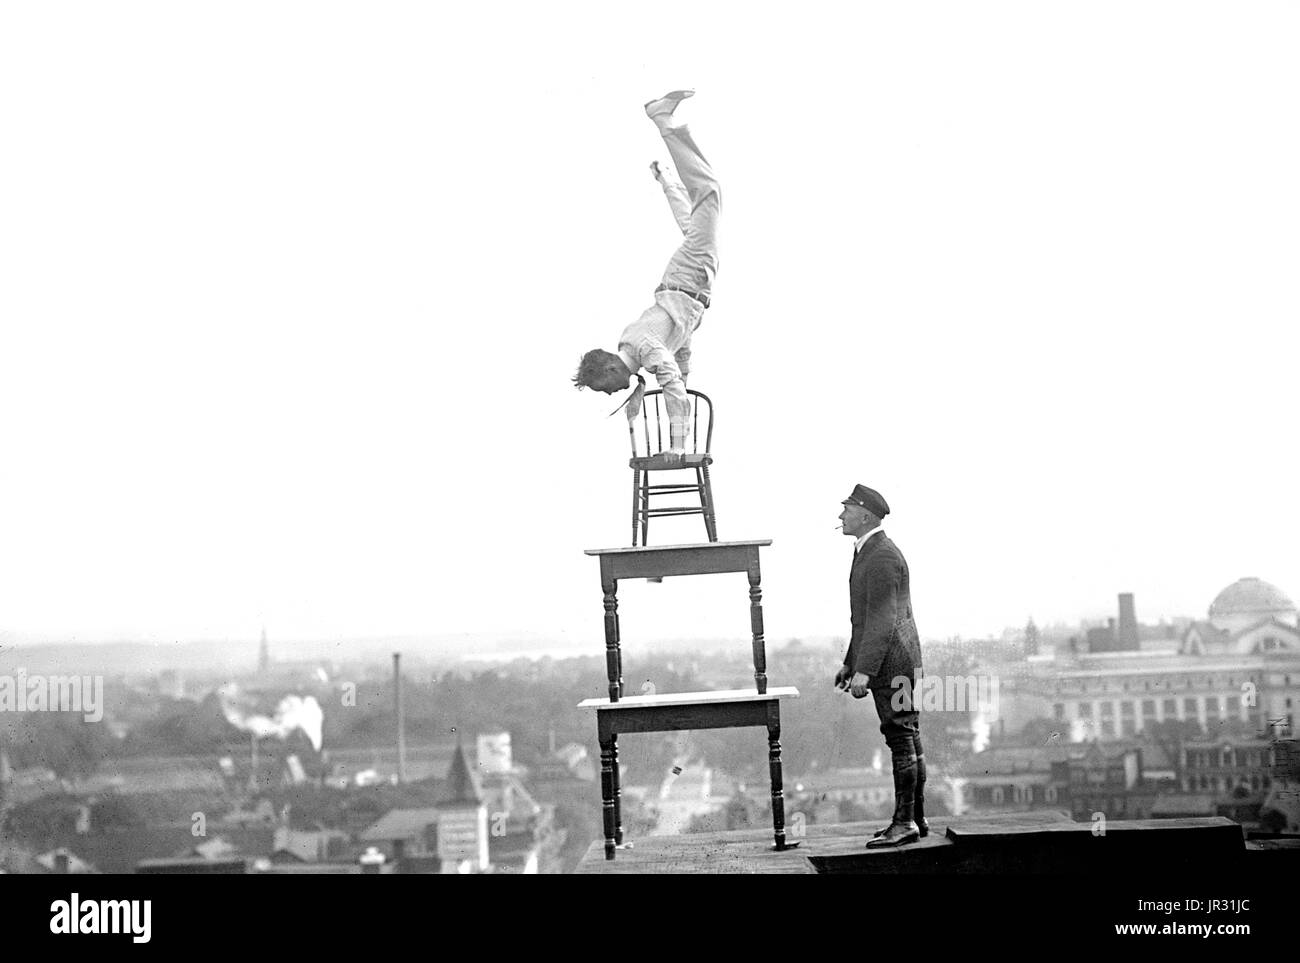 Reynolds performing acrobatic and balancing acts on high cornice above 9th Street, N.W. Washington, DC. John 'Jammie' Reynolds (born 1890 or 91 - ?) was an American daredevil. Little is known about early life, what became of him once he stopped performing or even his real name. An acrobat and juggler, he was known by many names - Daredevil Johnny, Daredevil Jack, the Climbing Wonder, The Lizard, the Human Spider, and the Human Fly. A newspaper article from 1922 claims he began performing at the age six in Buffalo, balancing on one foot from a flagpole 140 feet in the air. His first major stunt Stock Photo